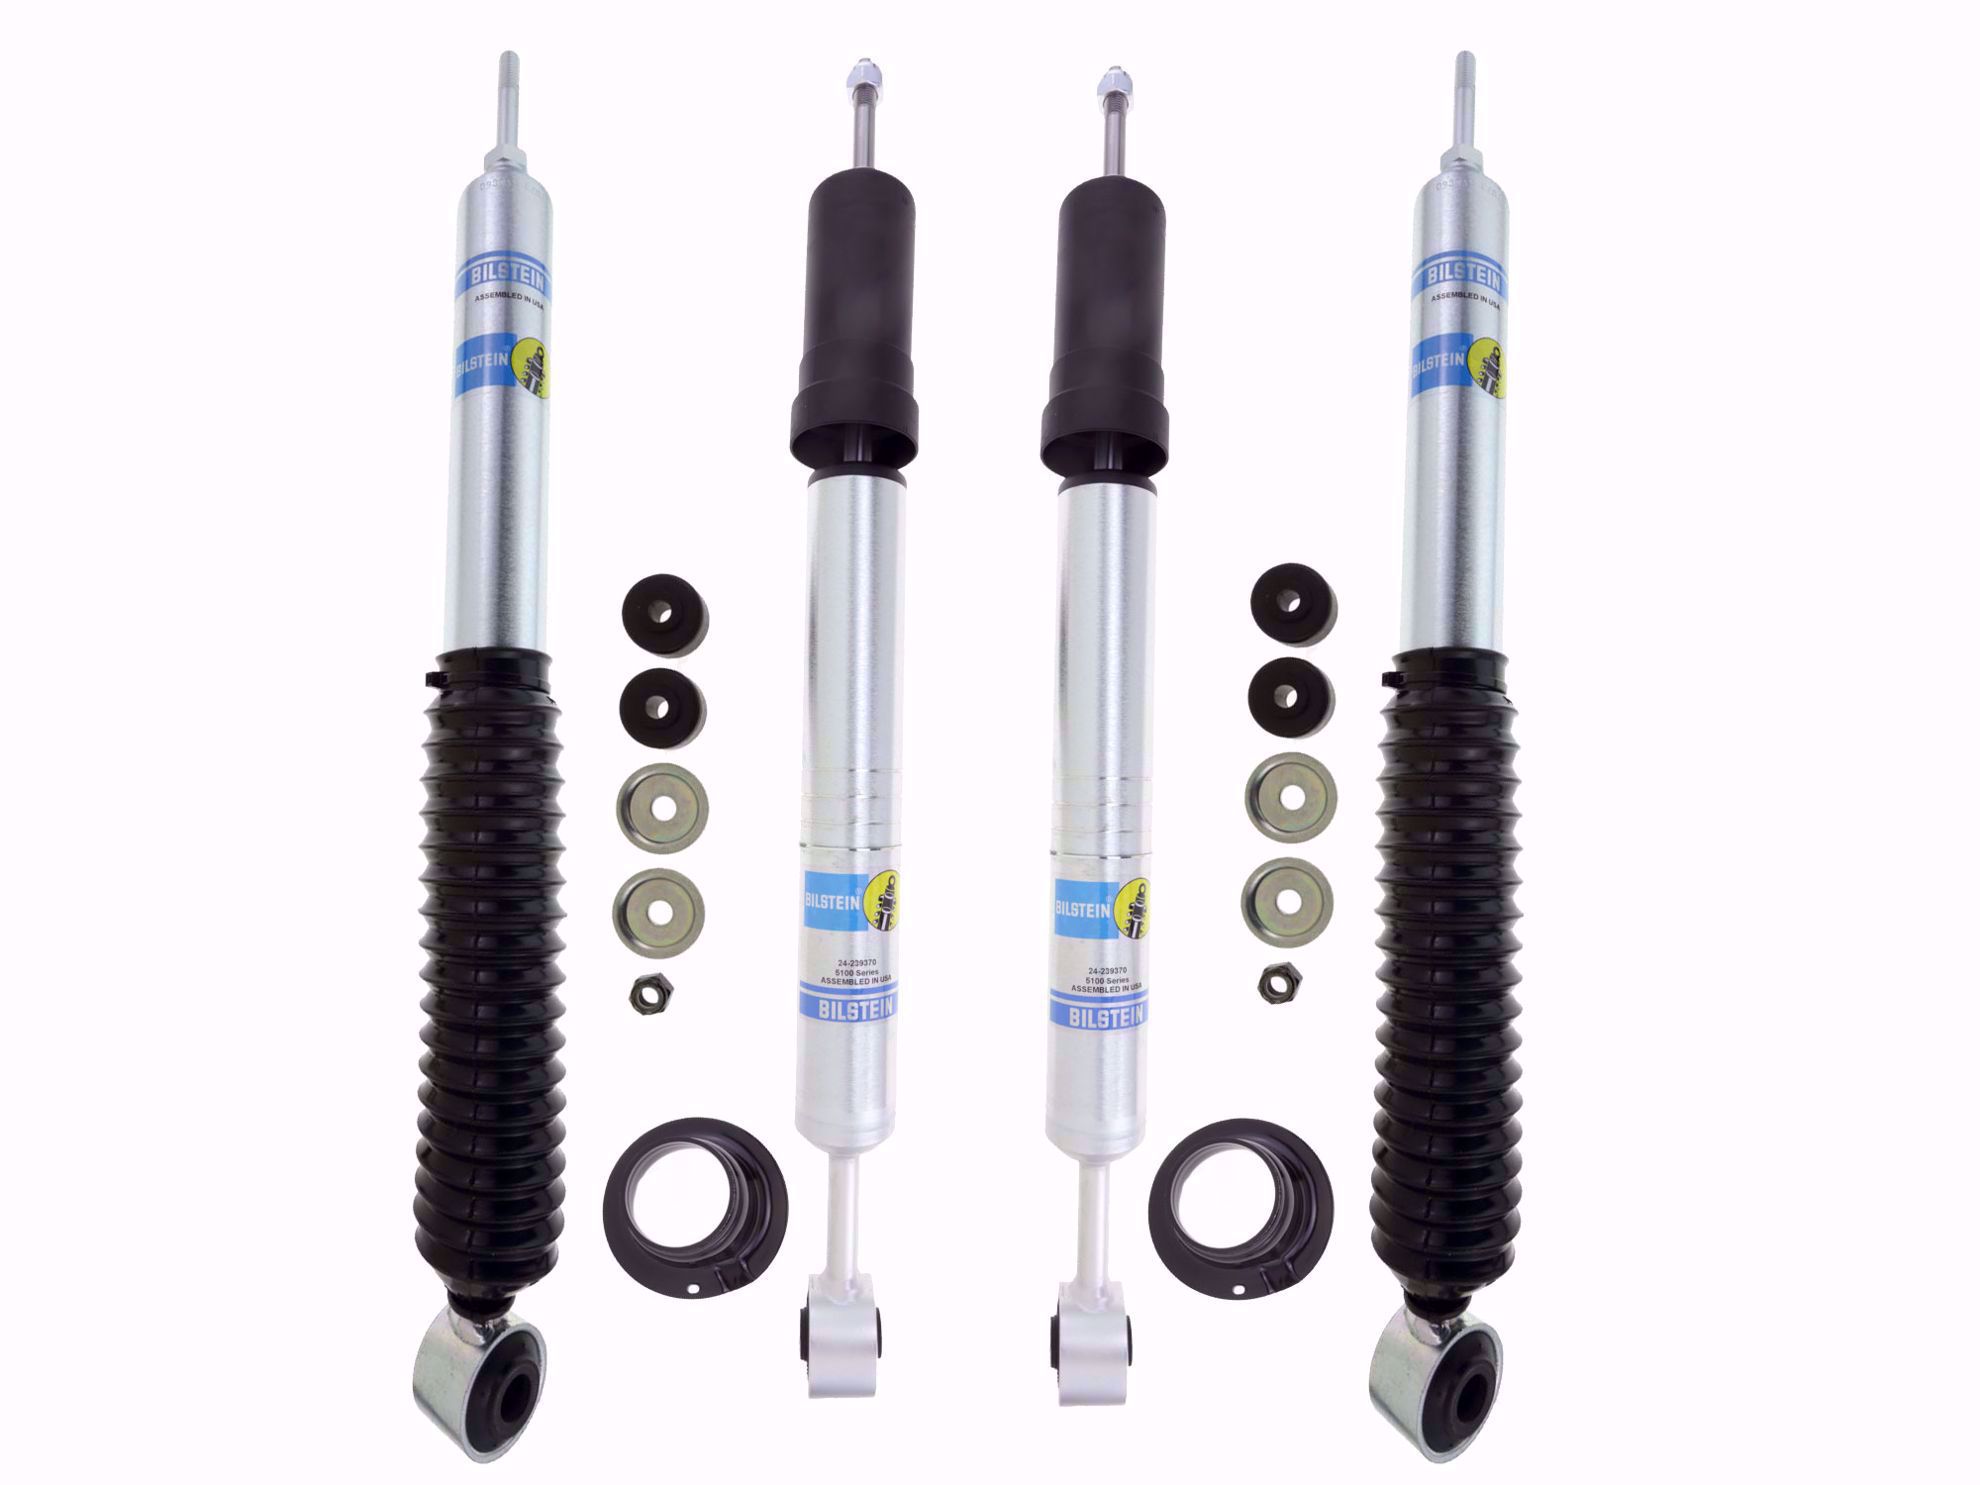 Bilstein B6 4600 Series 2 Rear Shocks Kit for Jeep Grand Cherokee Limited 99-04 Ride Monotube replacement Gas Charged Shock absorbers part number 24-029643